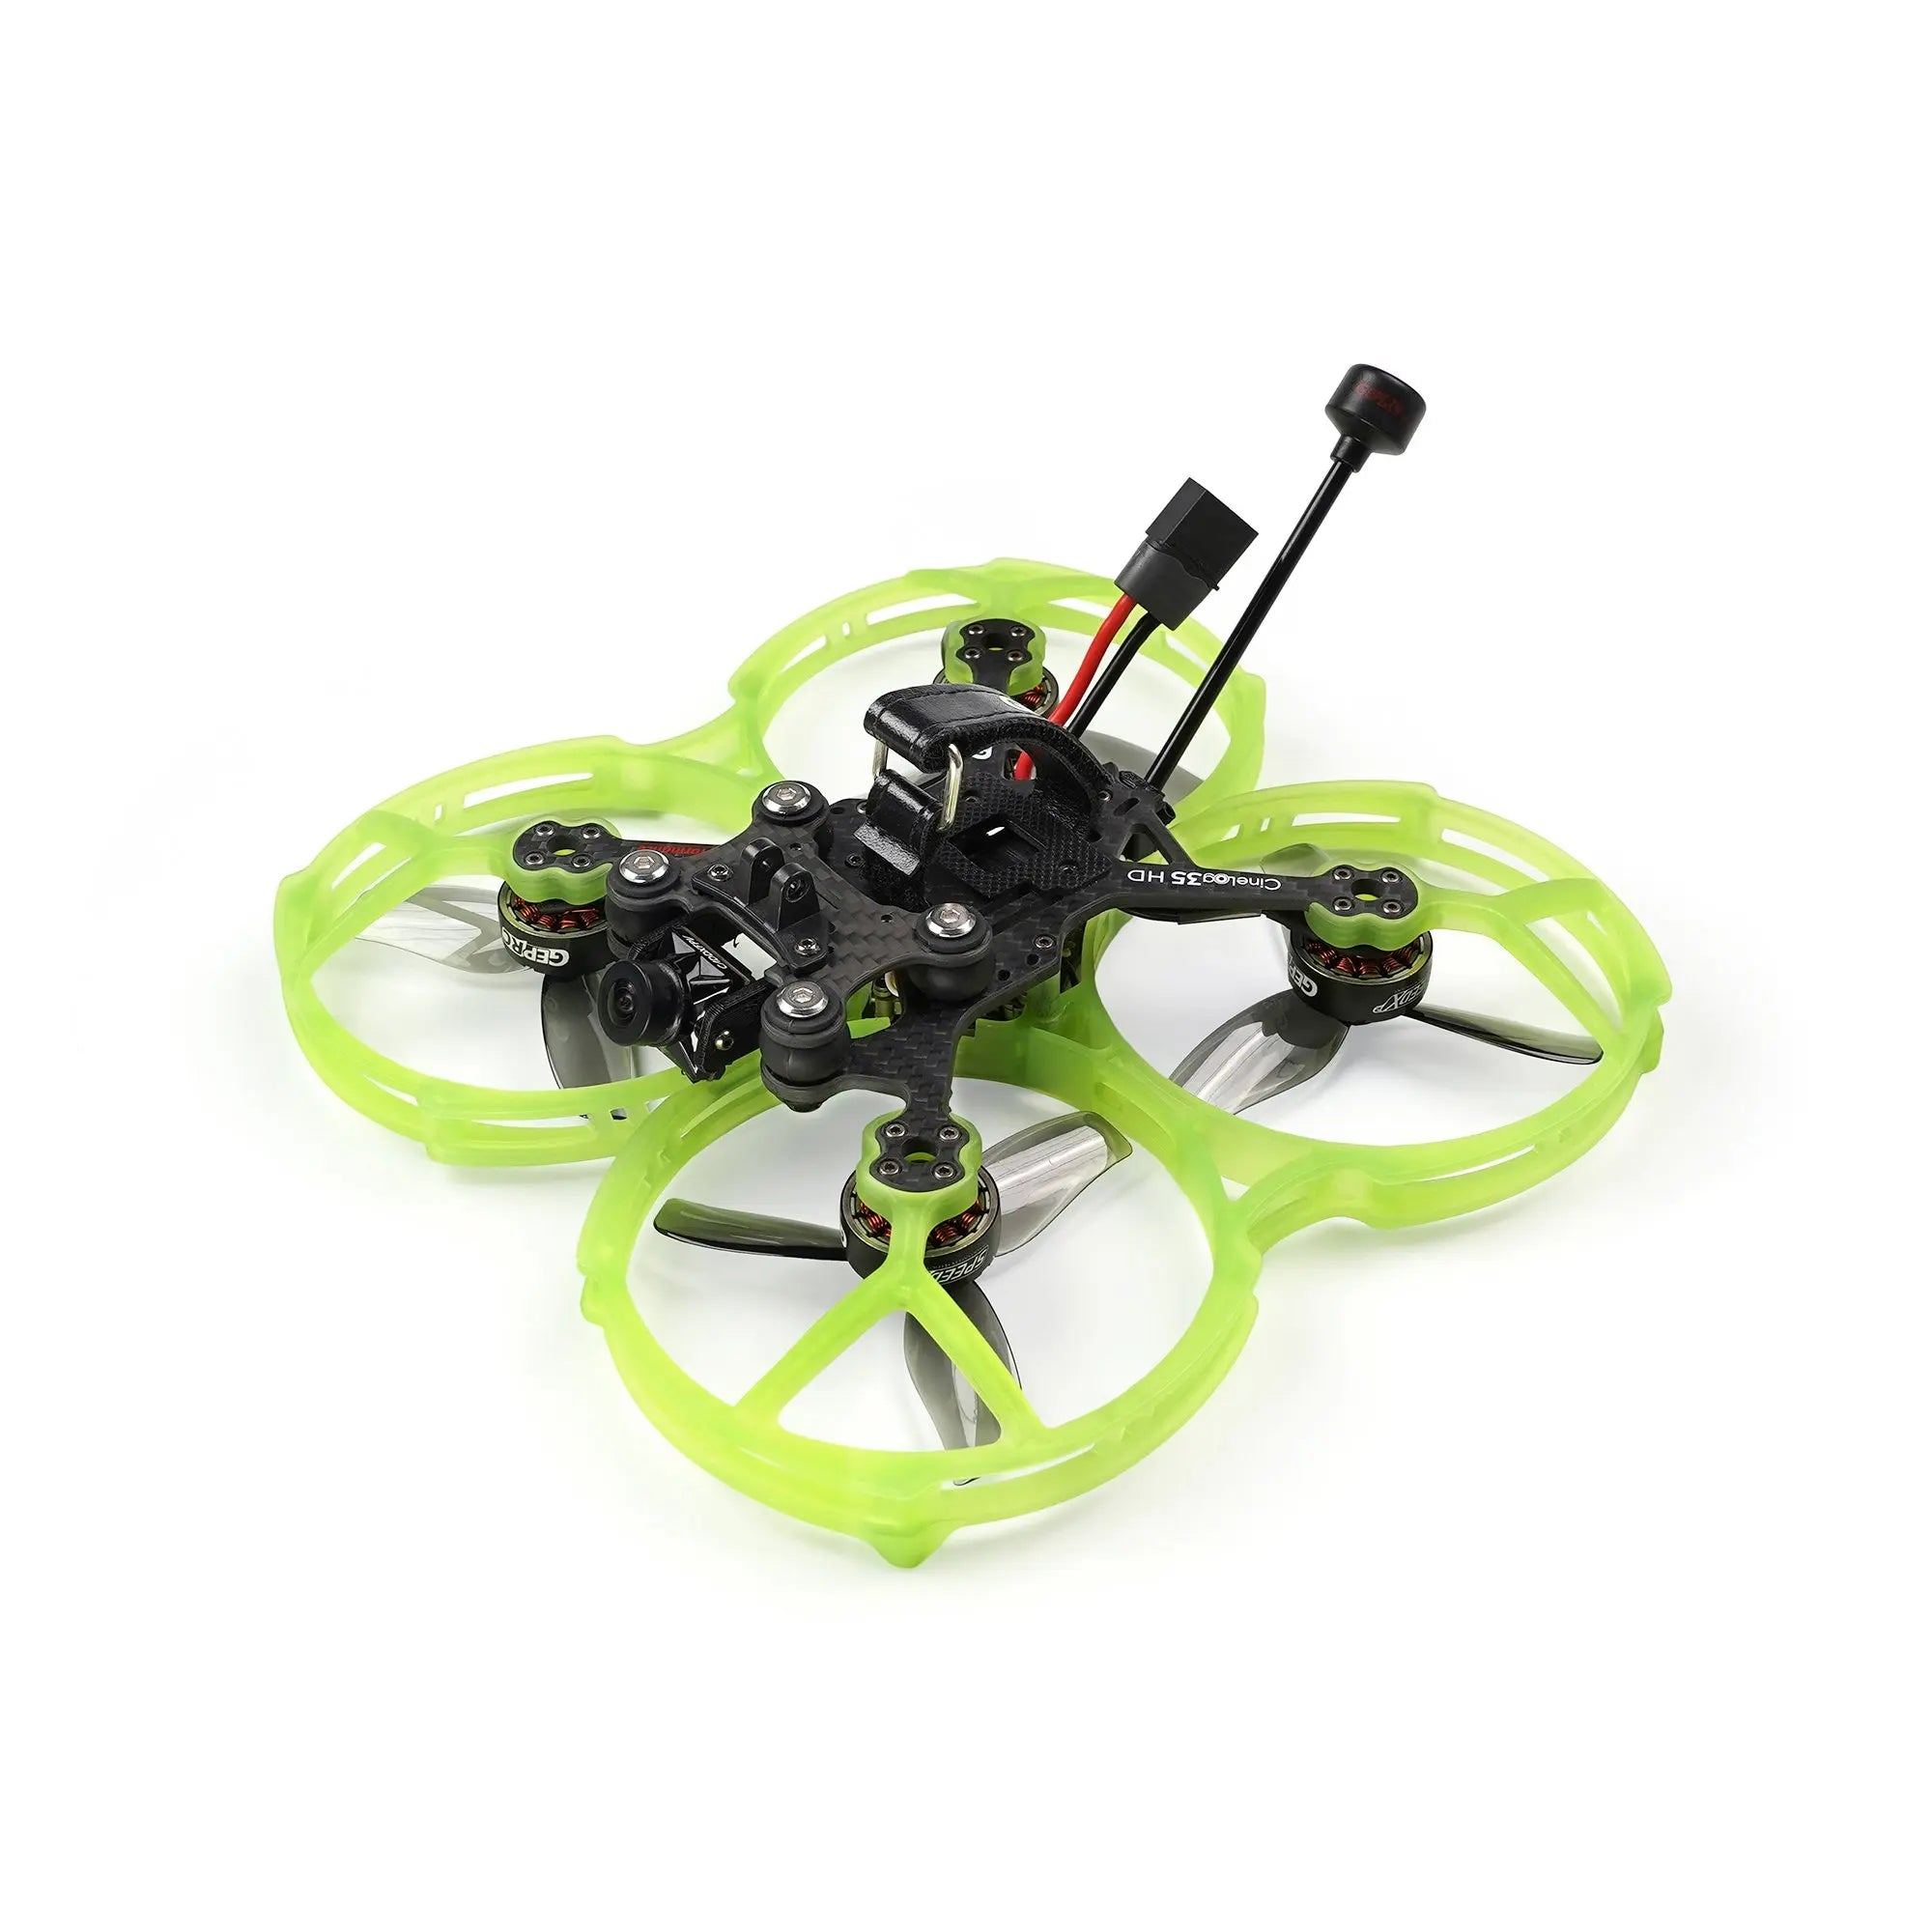 GEPRC CineLog35 FPV Drone, the integrated propeller guard design with high flight safety allows indoors and outdoors flight.